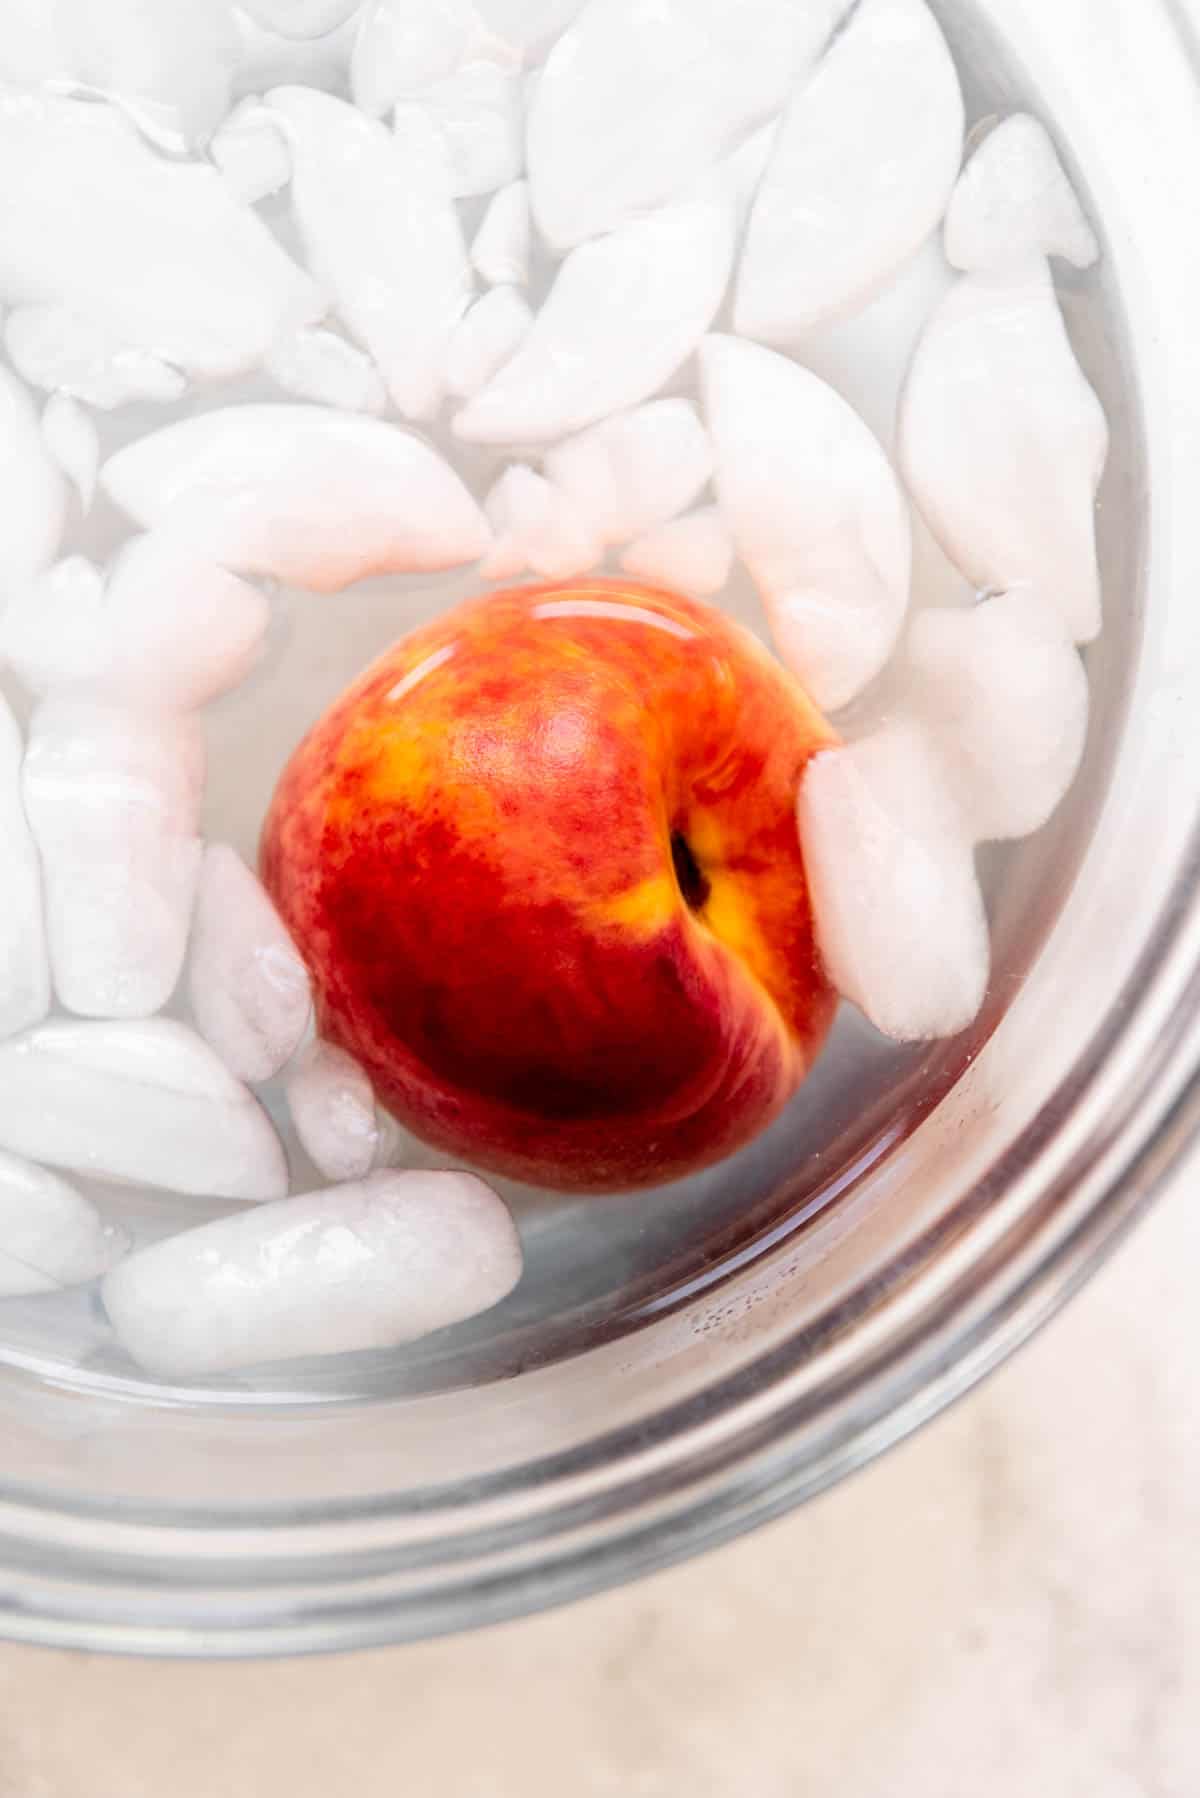 A blanched peach in an ice water bath to stop the cooking process.